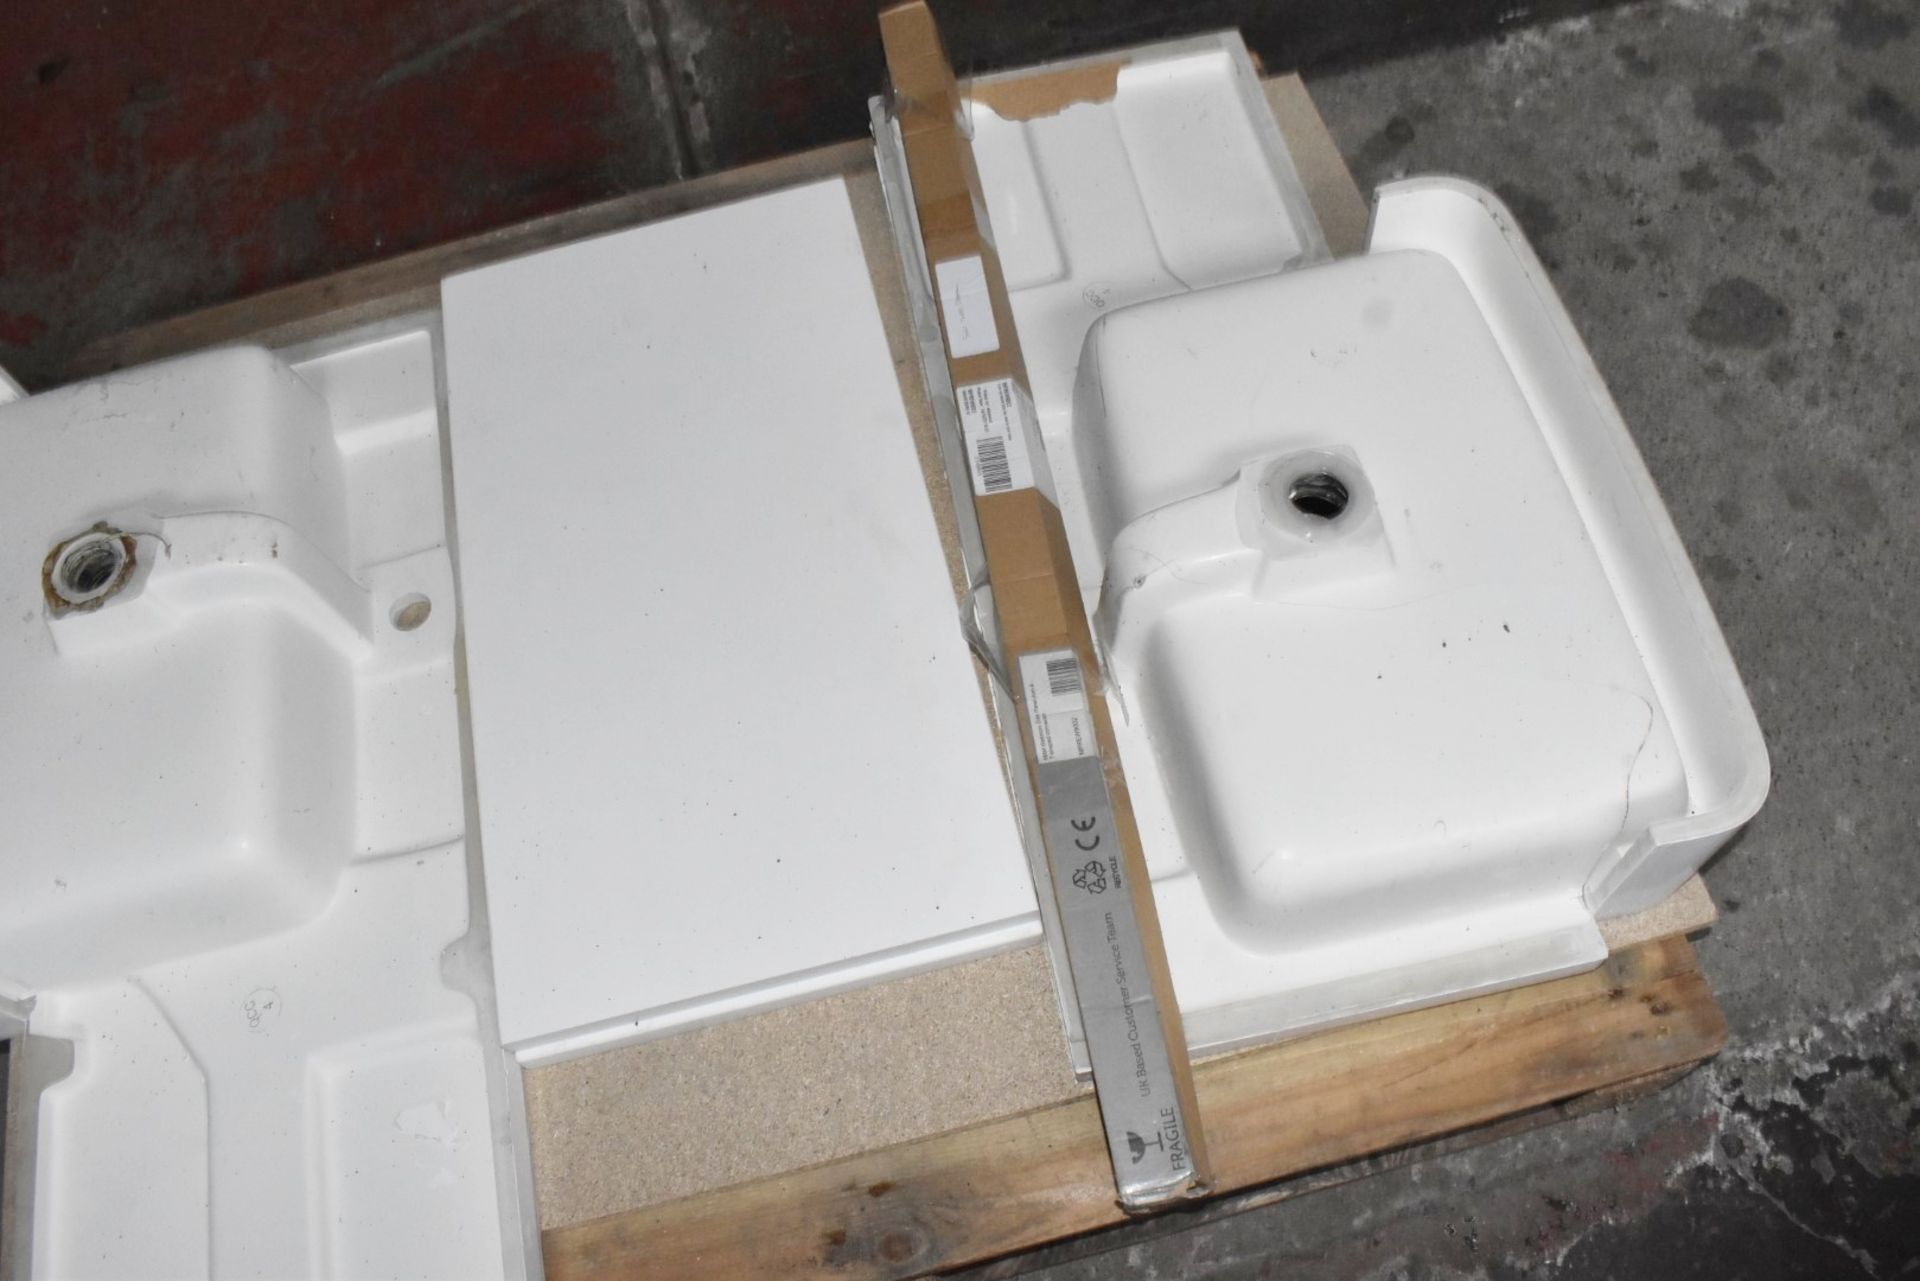 1 x Assorted Collection of Bathroom Stock - Shower Tray, Vanity Unit, Stone Sinks, Shower Panels - Image 15 of 17